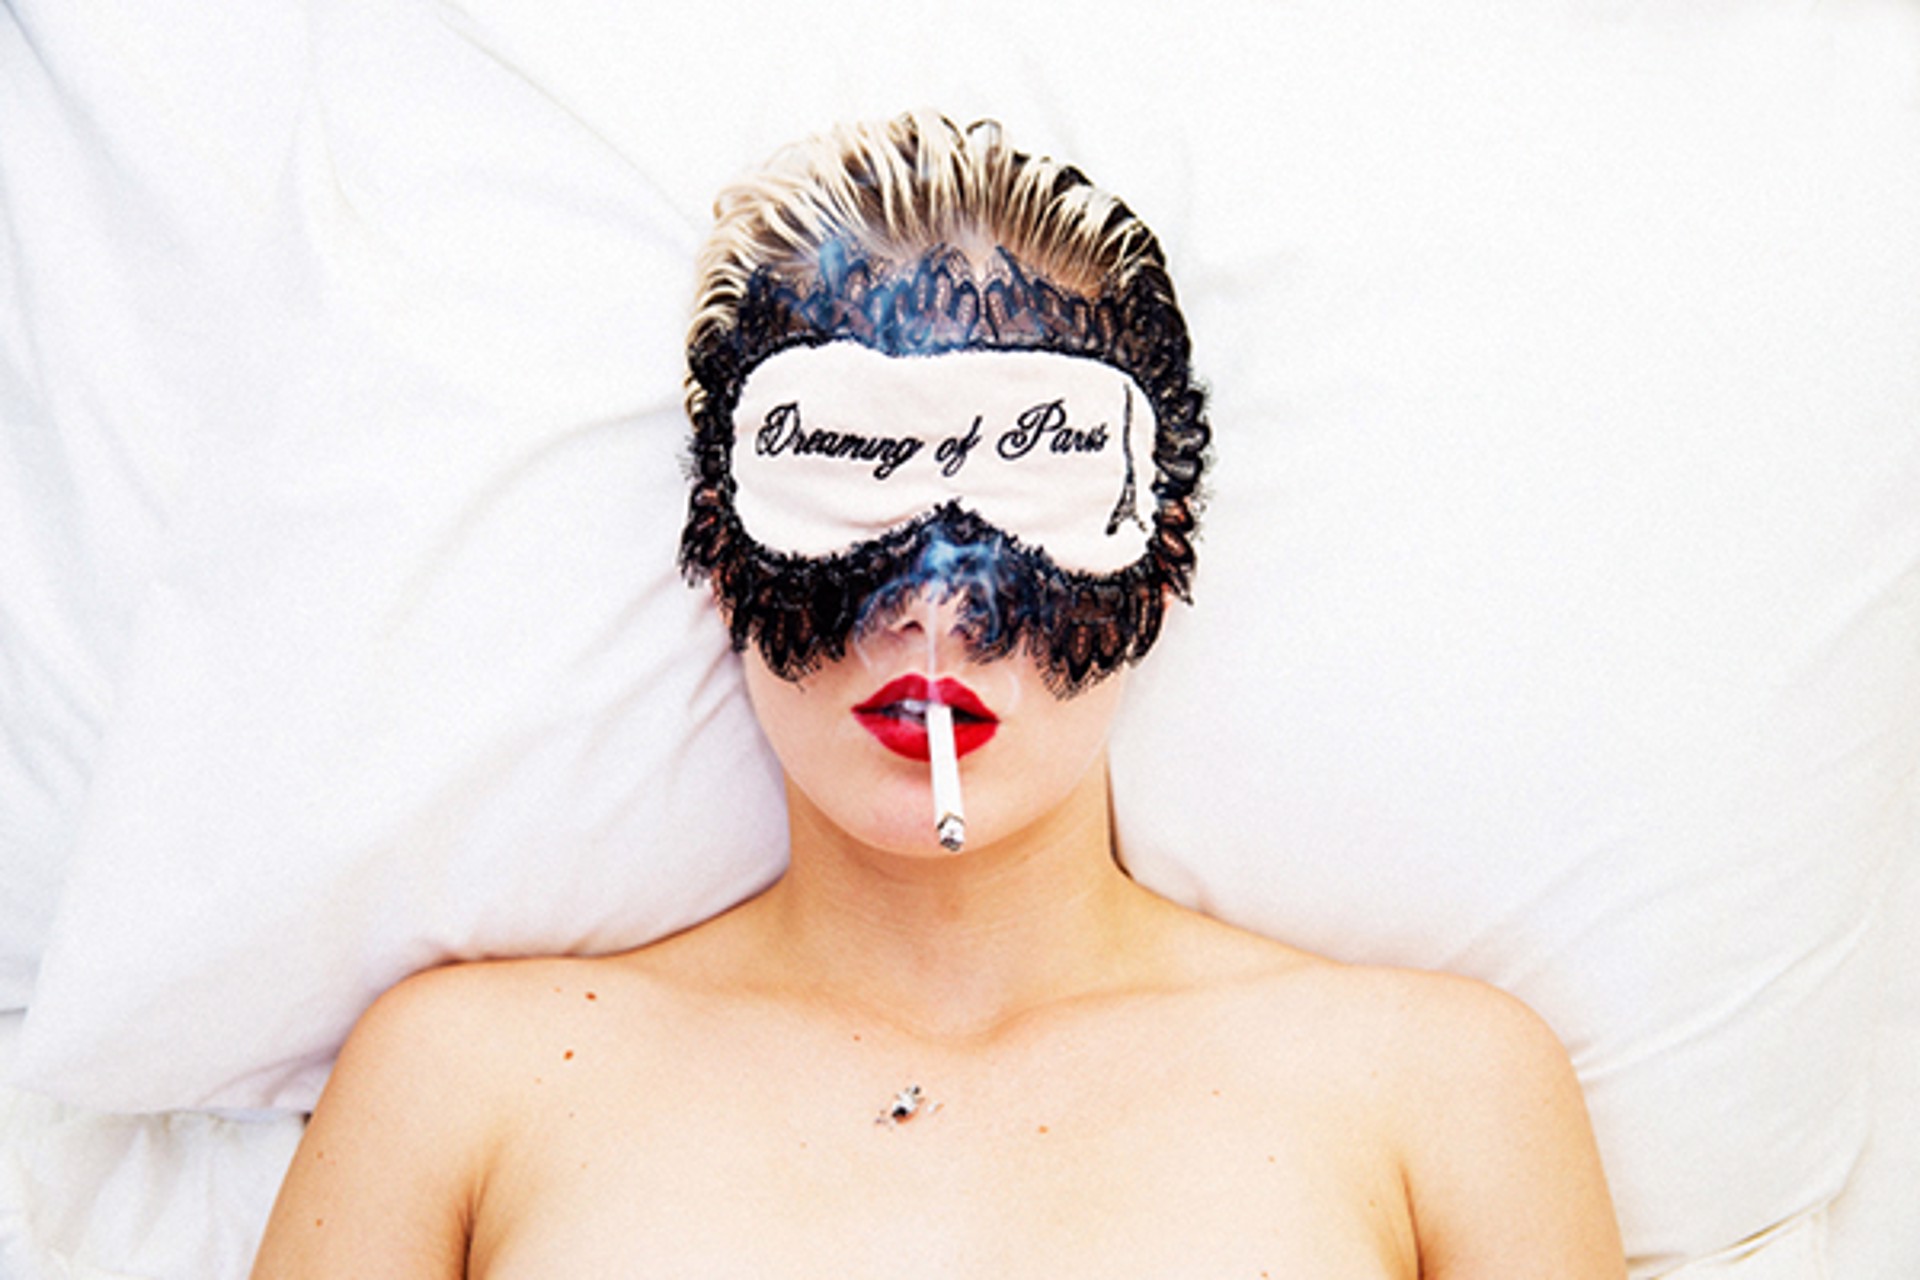 Dreaming of Paris by Tyler Shields